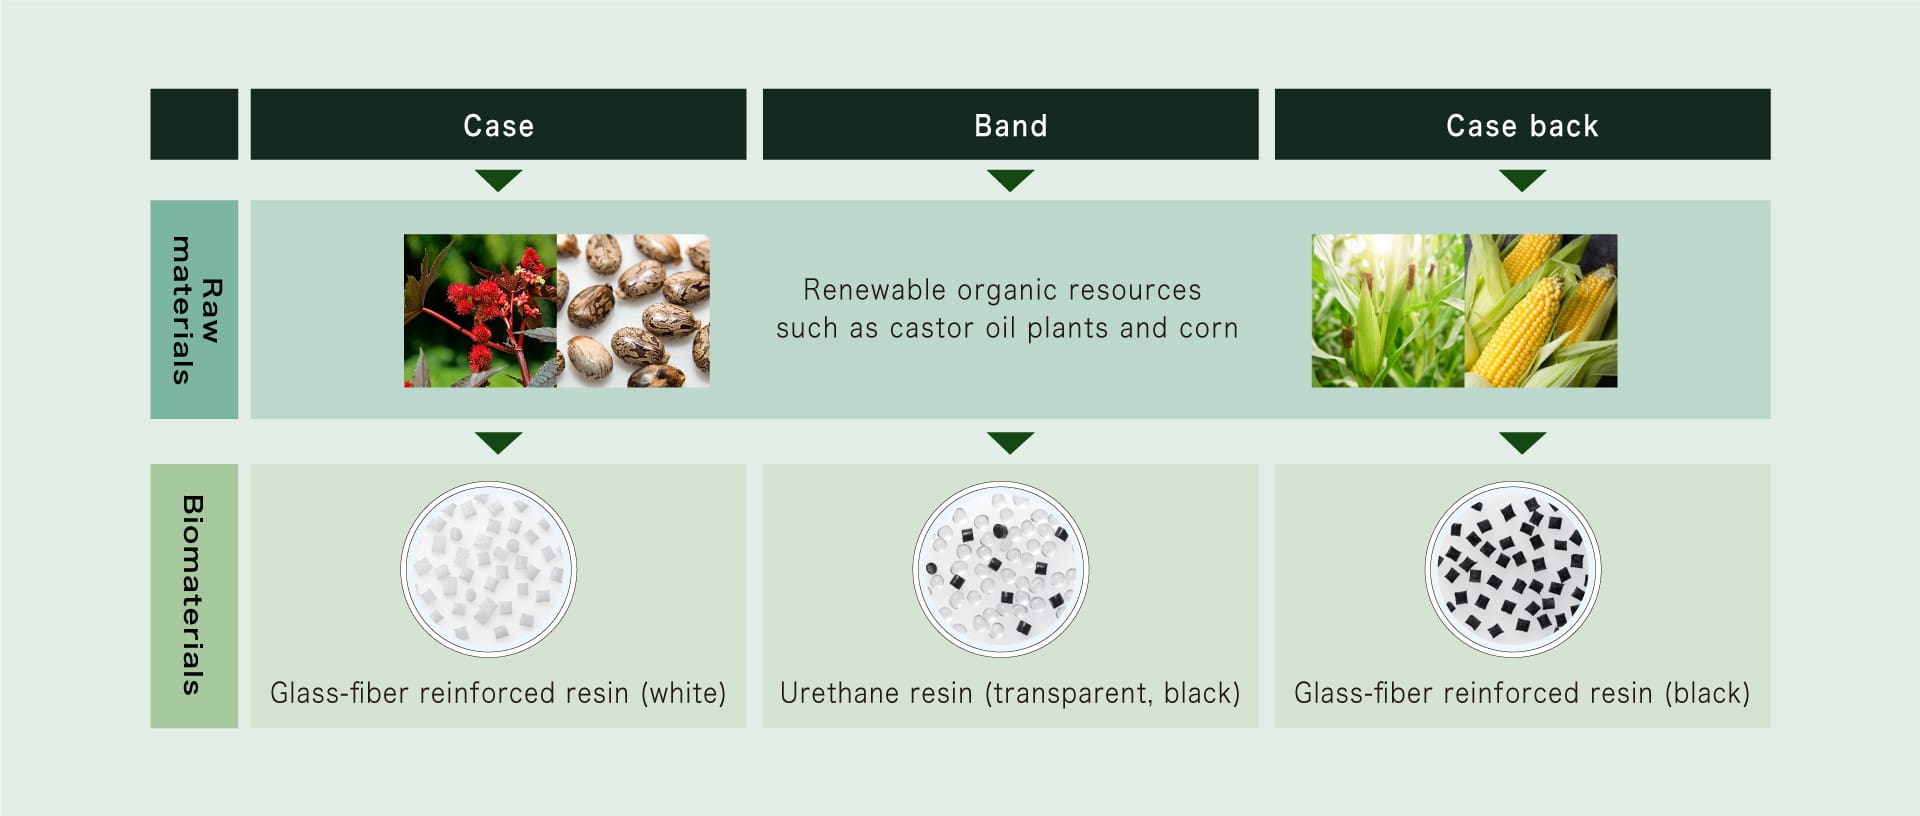 Infographic of raw materials processed to biomaterials for the different components of the watch